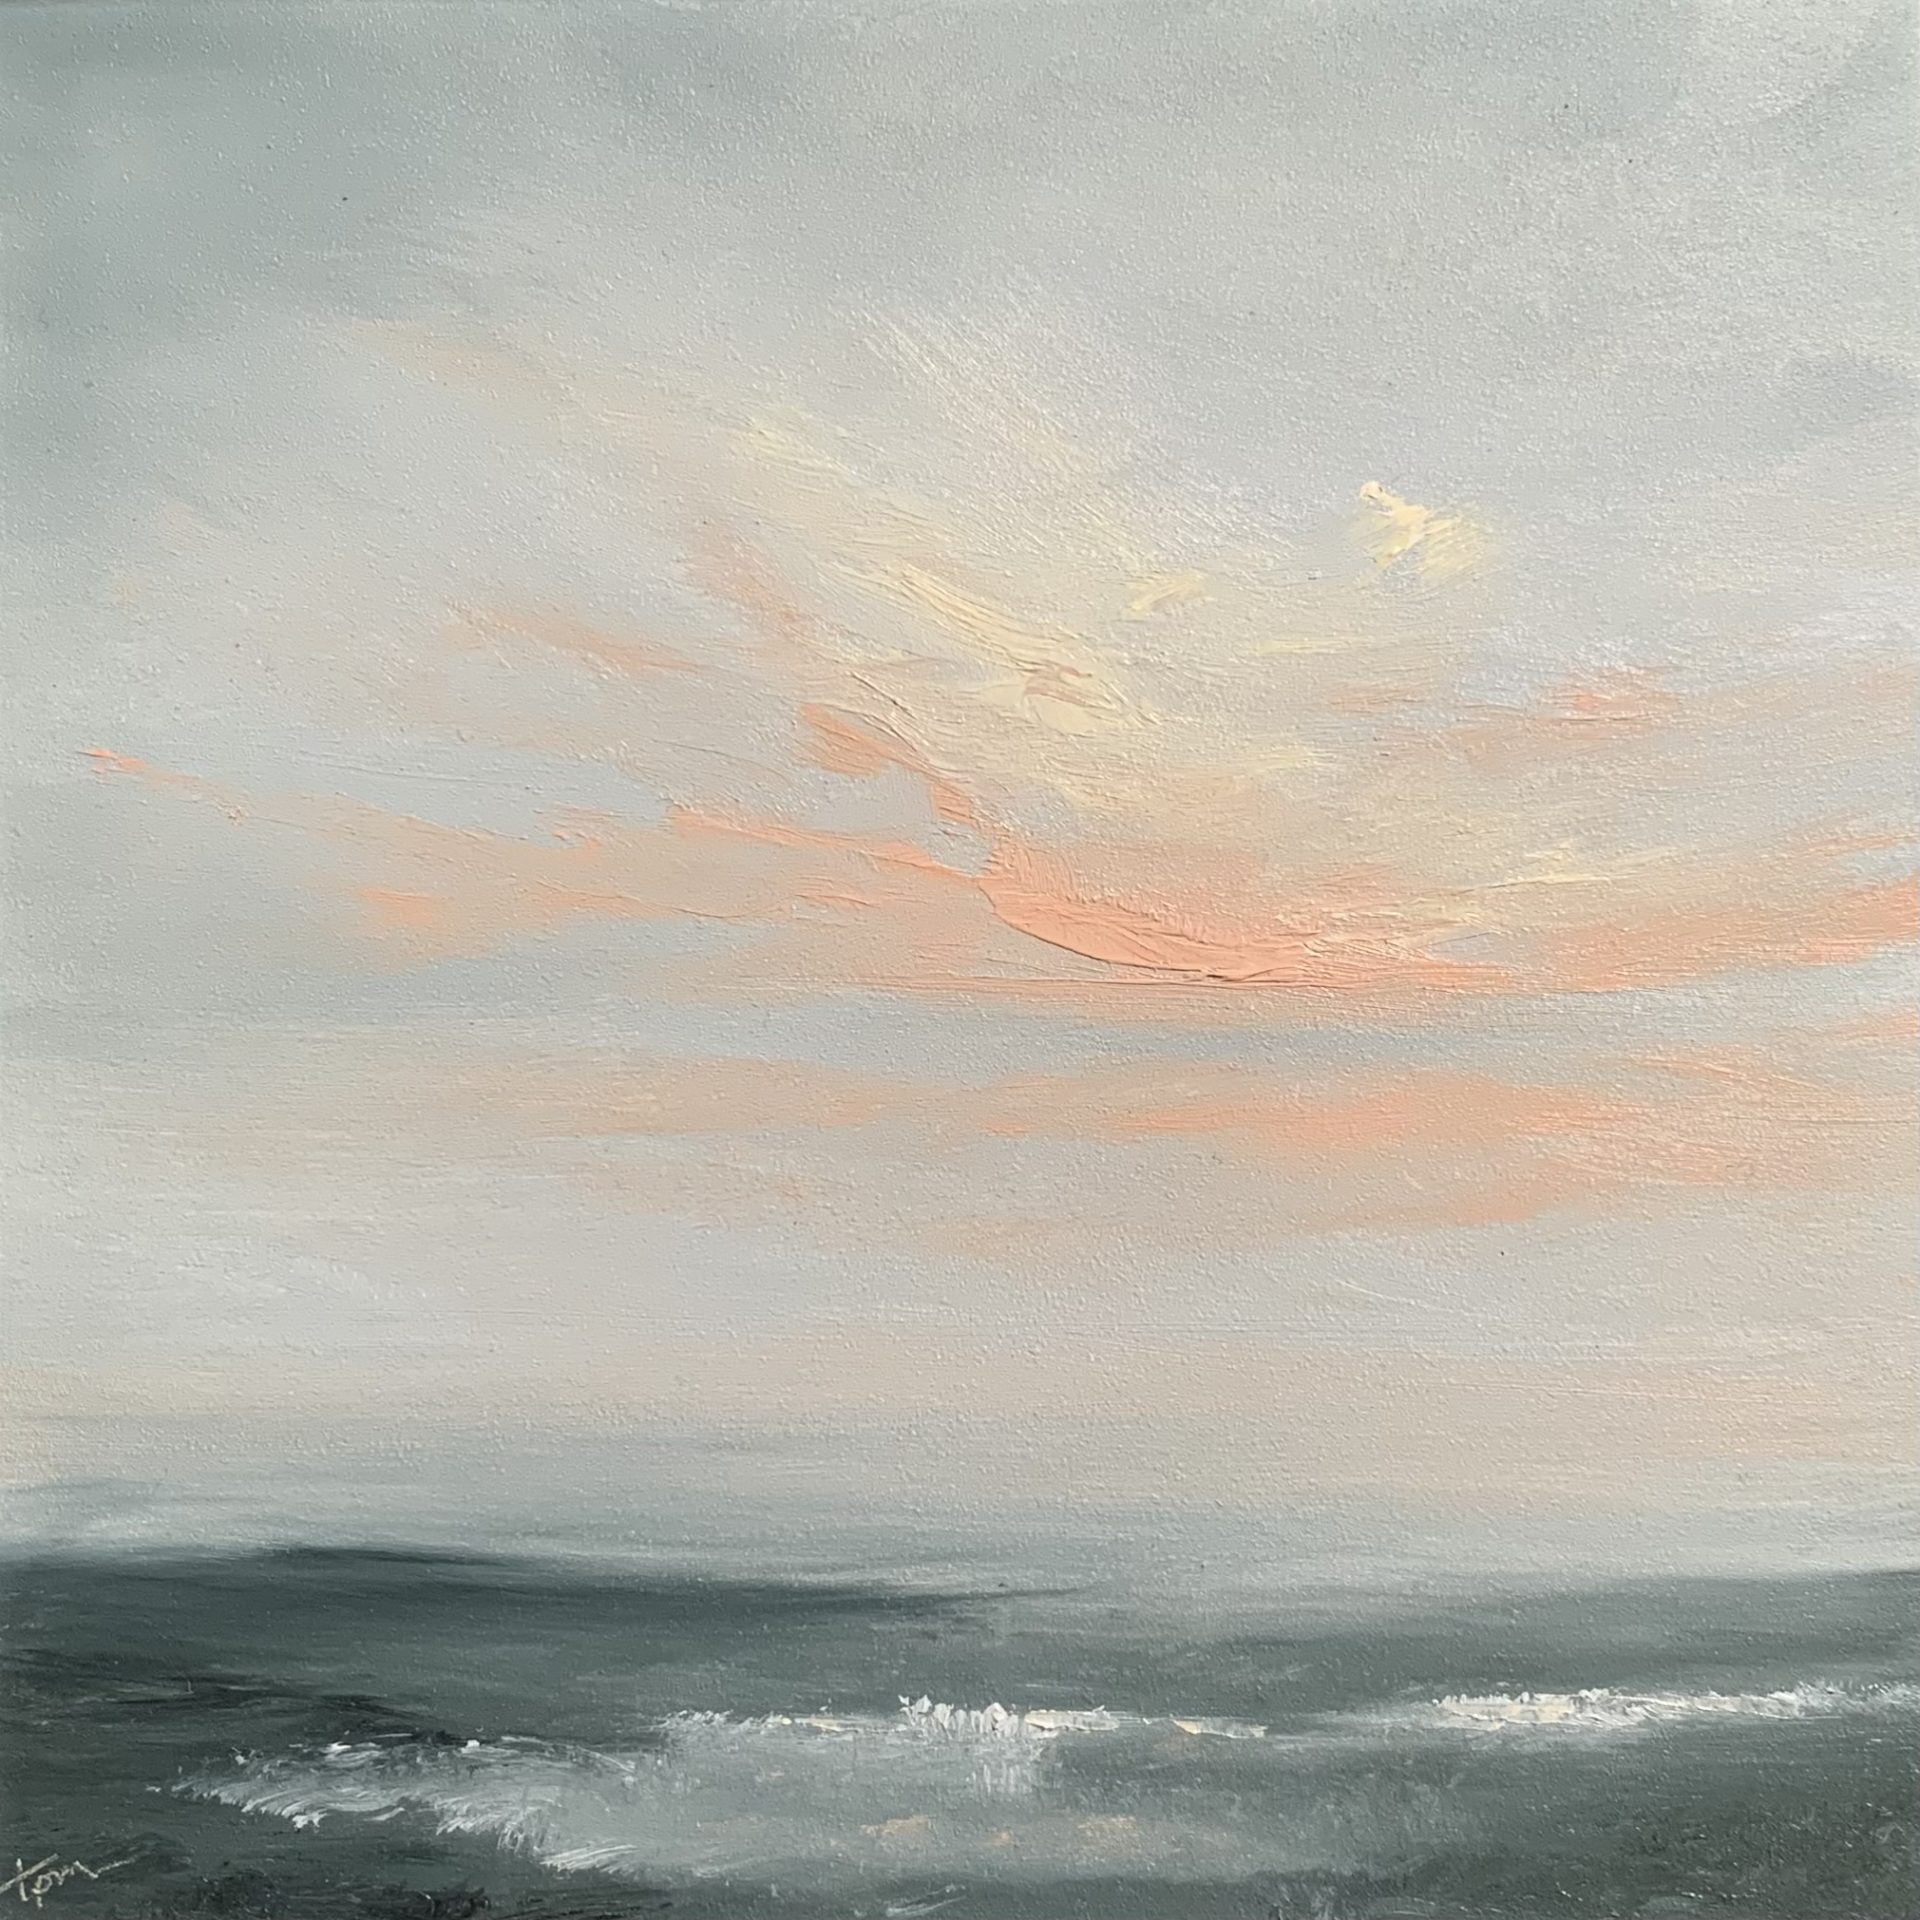 Original seascape oil painting by Tisha Mark, "Week 23, 52 Weeks of Finding Light Series" 6"x6" oil on gessobord (2023). Painting is a moody seascape painted in a limited palette of mostly gray tones, featuring orange and yellow sunlit clouds over an atmospheric seashore.